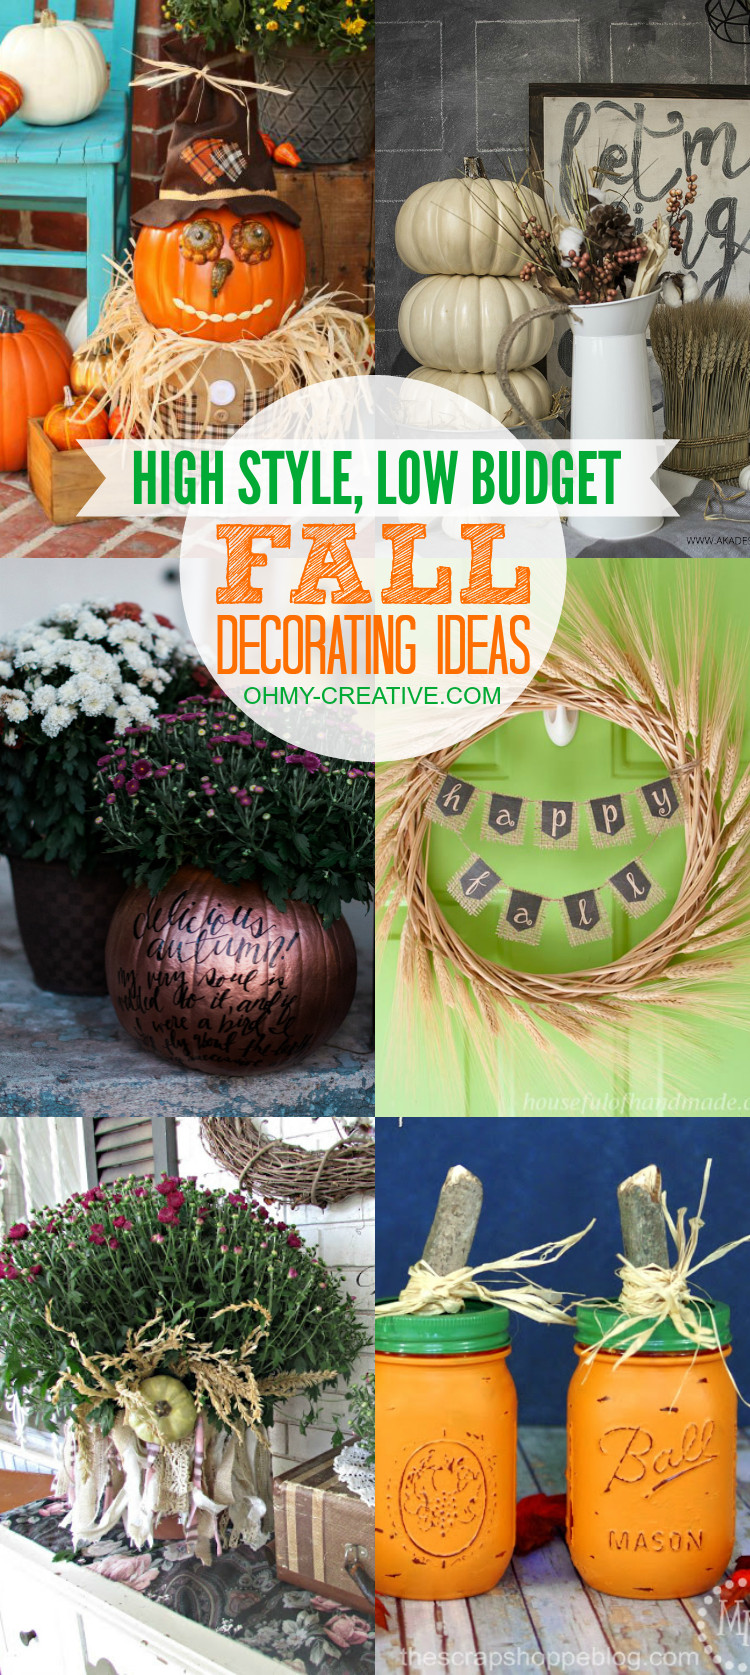 Inexpensive Fall Decorating Ideas
 High Style Low Bud Fall Decorating Ideas